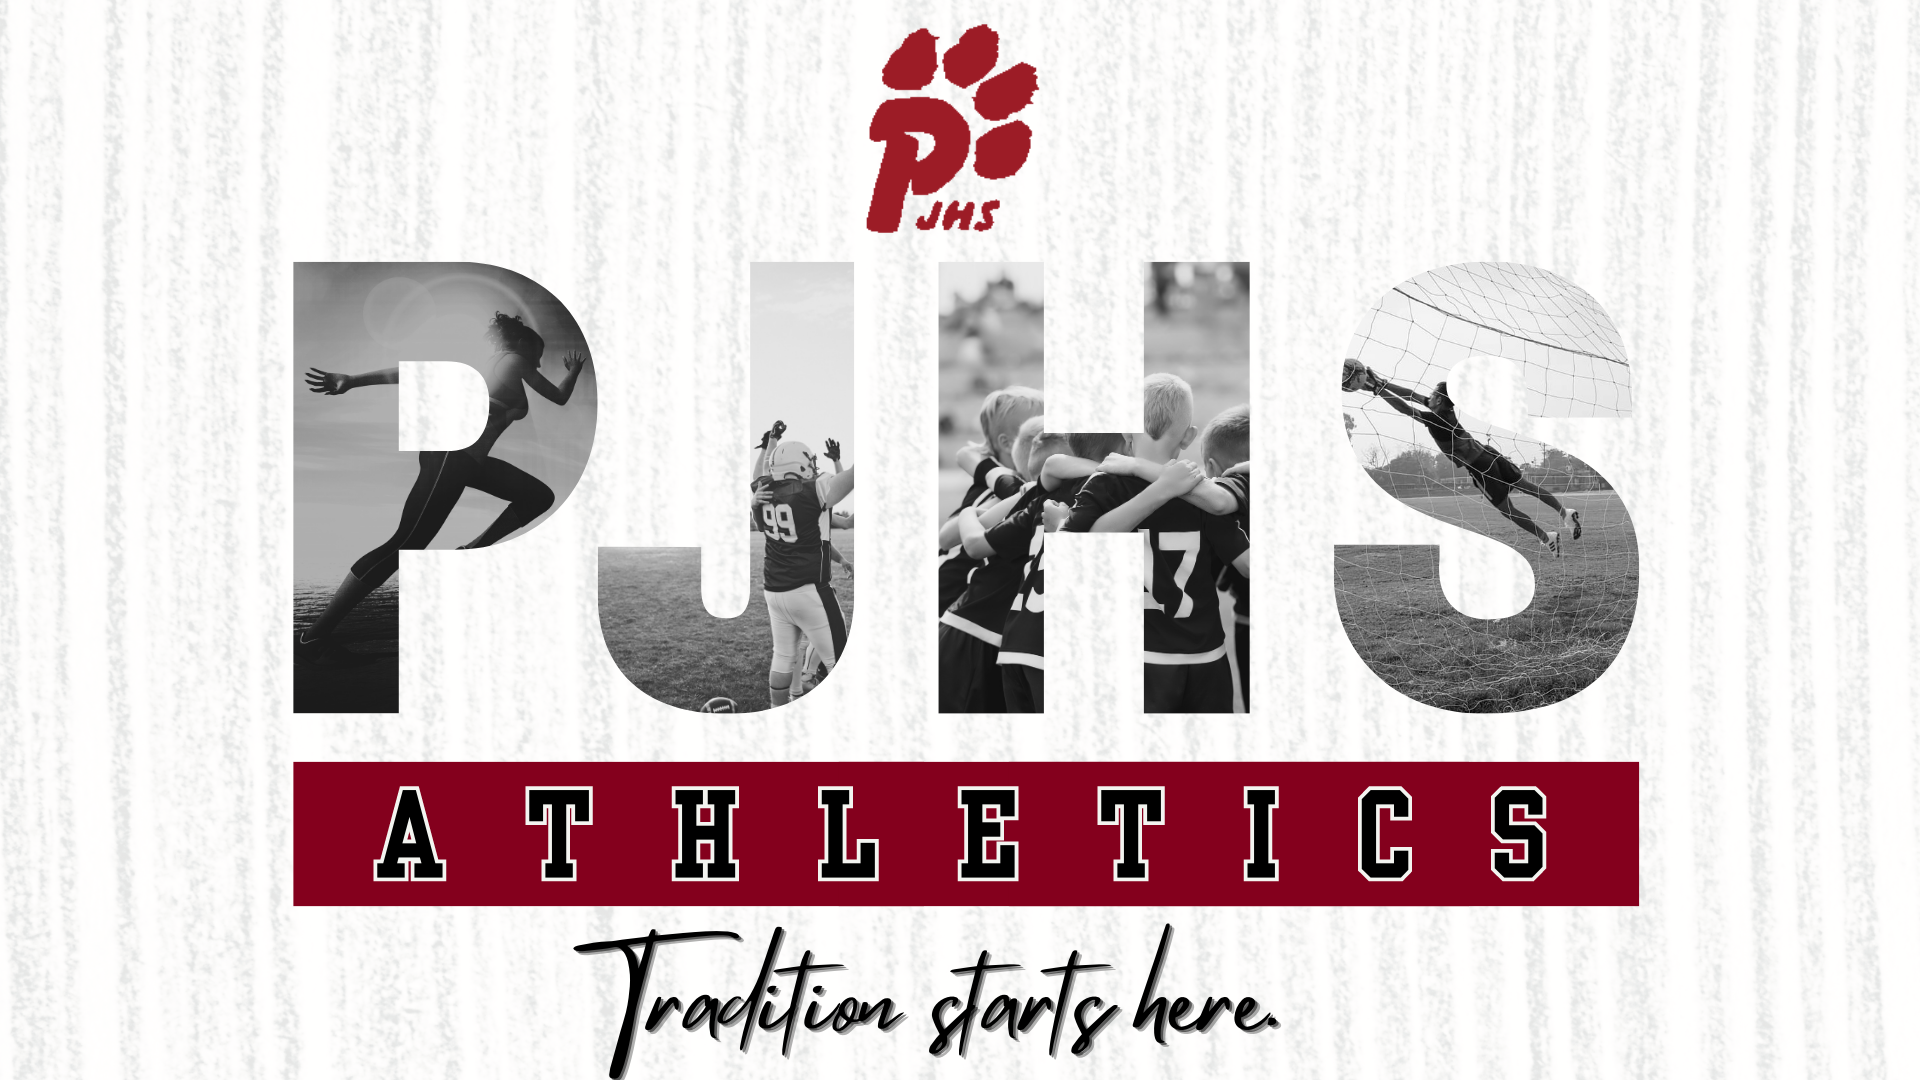 pjhs athletics tradition starts here